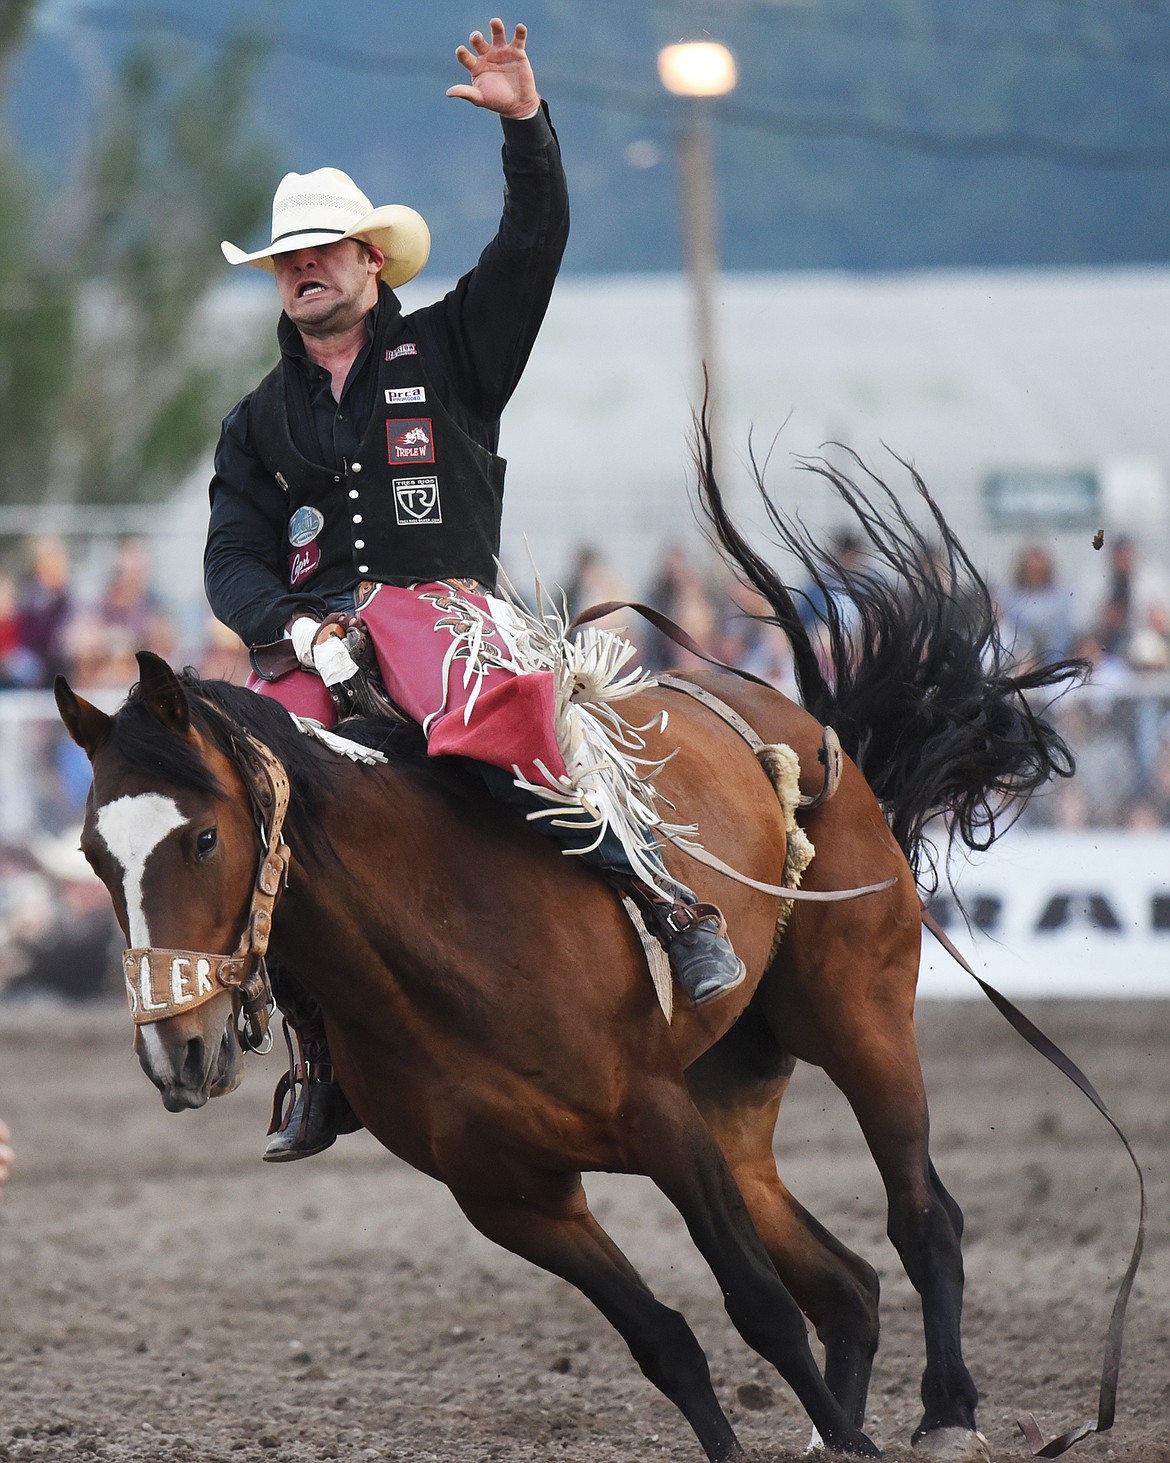 Wyatt Bloom, from Bozeman, holds on to his horse Mind Game during bareback riding at the Northwest Montana Fair PRCA Rodeo at the Flathead County Fairgrounds on Saturday. (Casey Kreider/Daily Inter Lake)